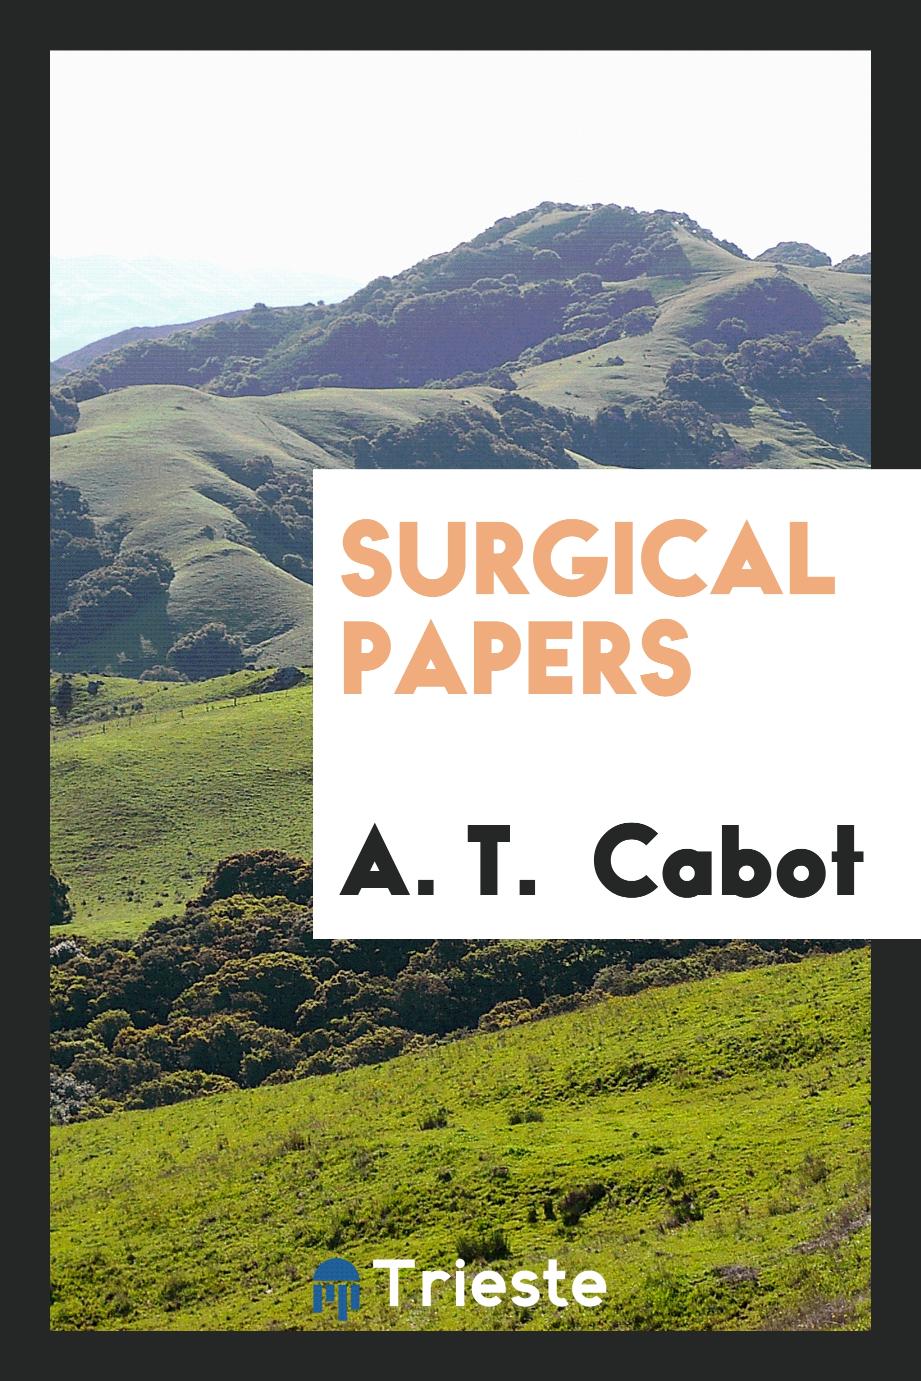 Surgical papers